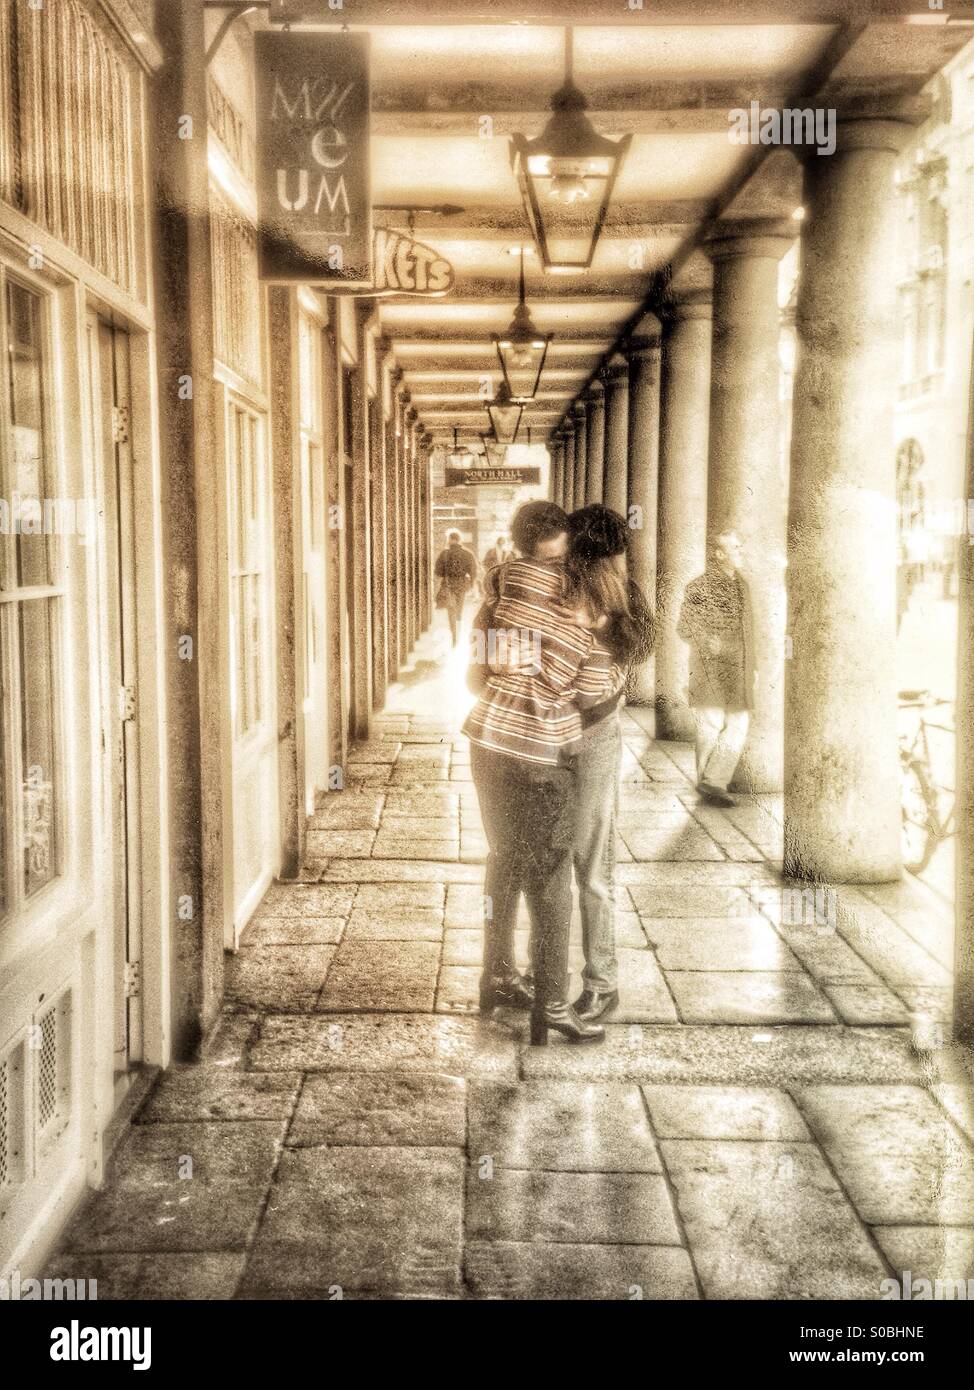 A couple embrace in Covent Garden Stock Photo